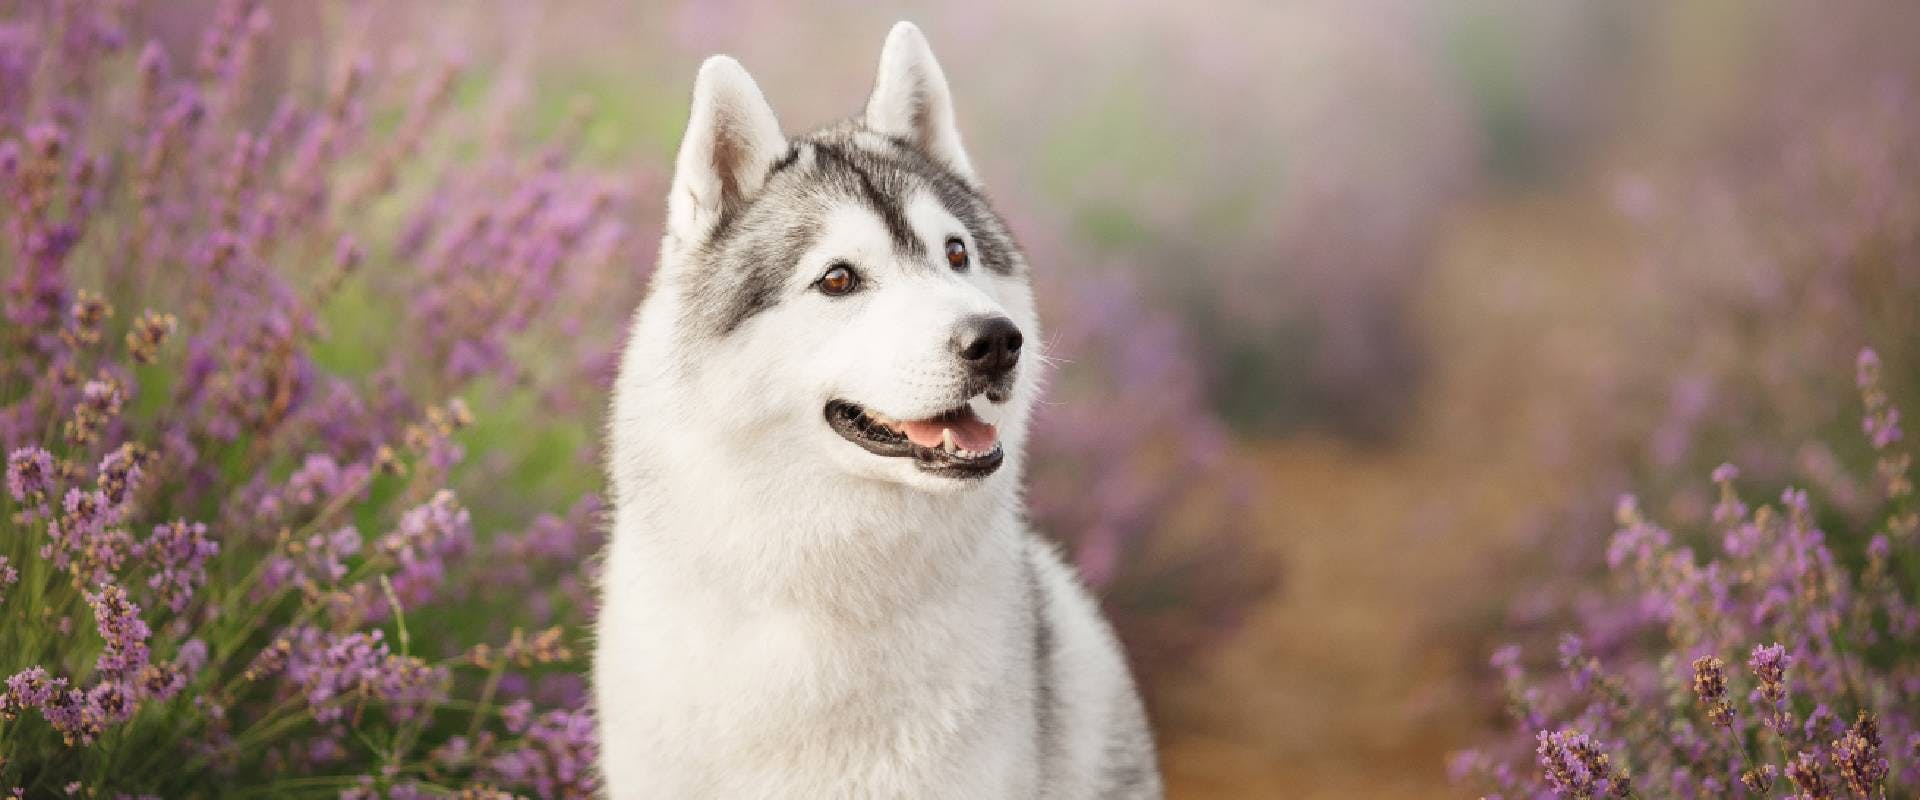 White and grey Husky in a lavender field